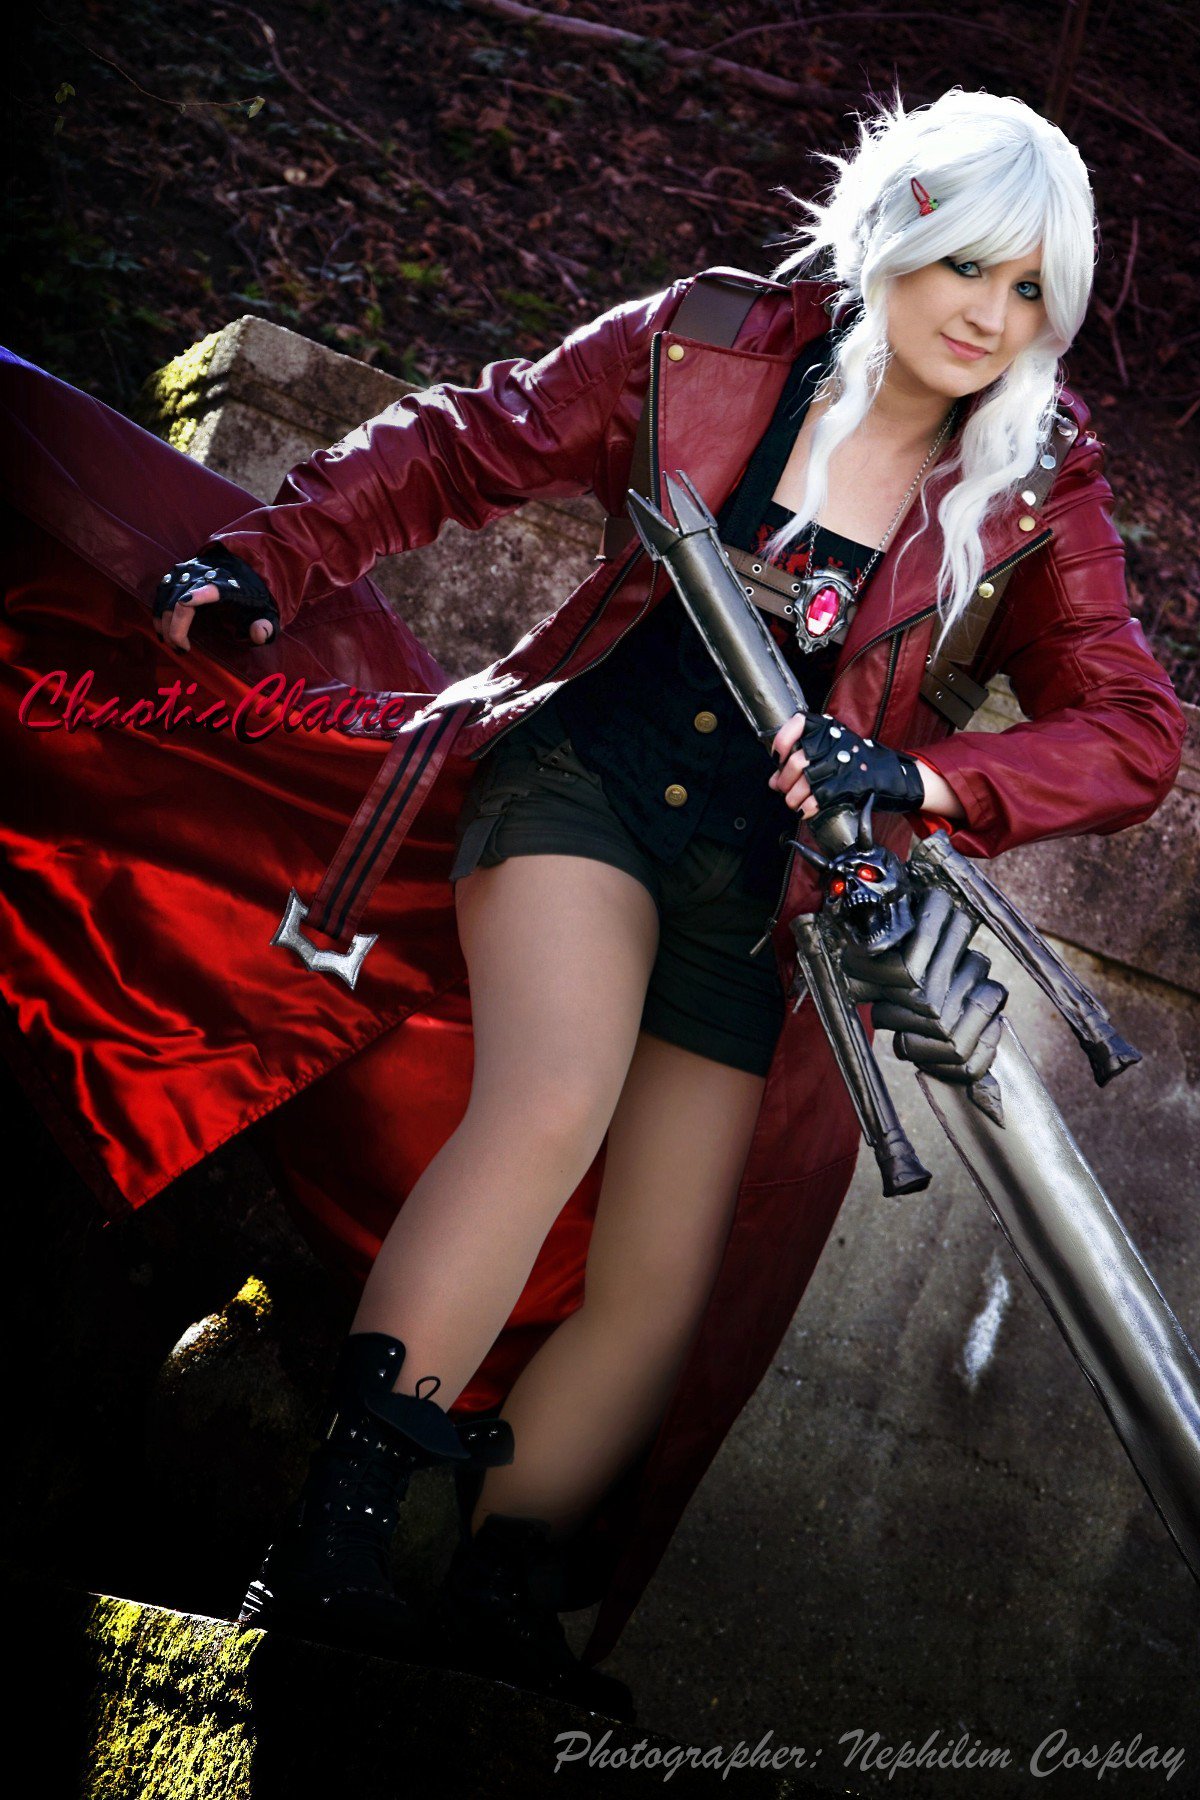 ChaoticClaire 🏹🔪 on X: Re-uploading my Dante cosplay 🍓 Devil May Cry 5  is coming, I'm so happy! Let's rock! ❤💜💙 #DMC5 #DevilMayCry5 #DevilMayCry  #capcom #cosplay @dev1_official @ShareMyCosplay Design by @CheshireCosplay  Photo